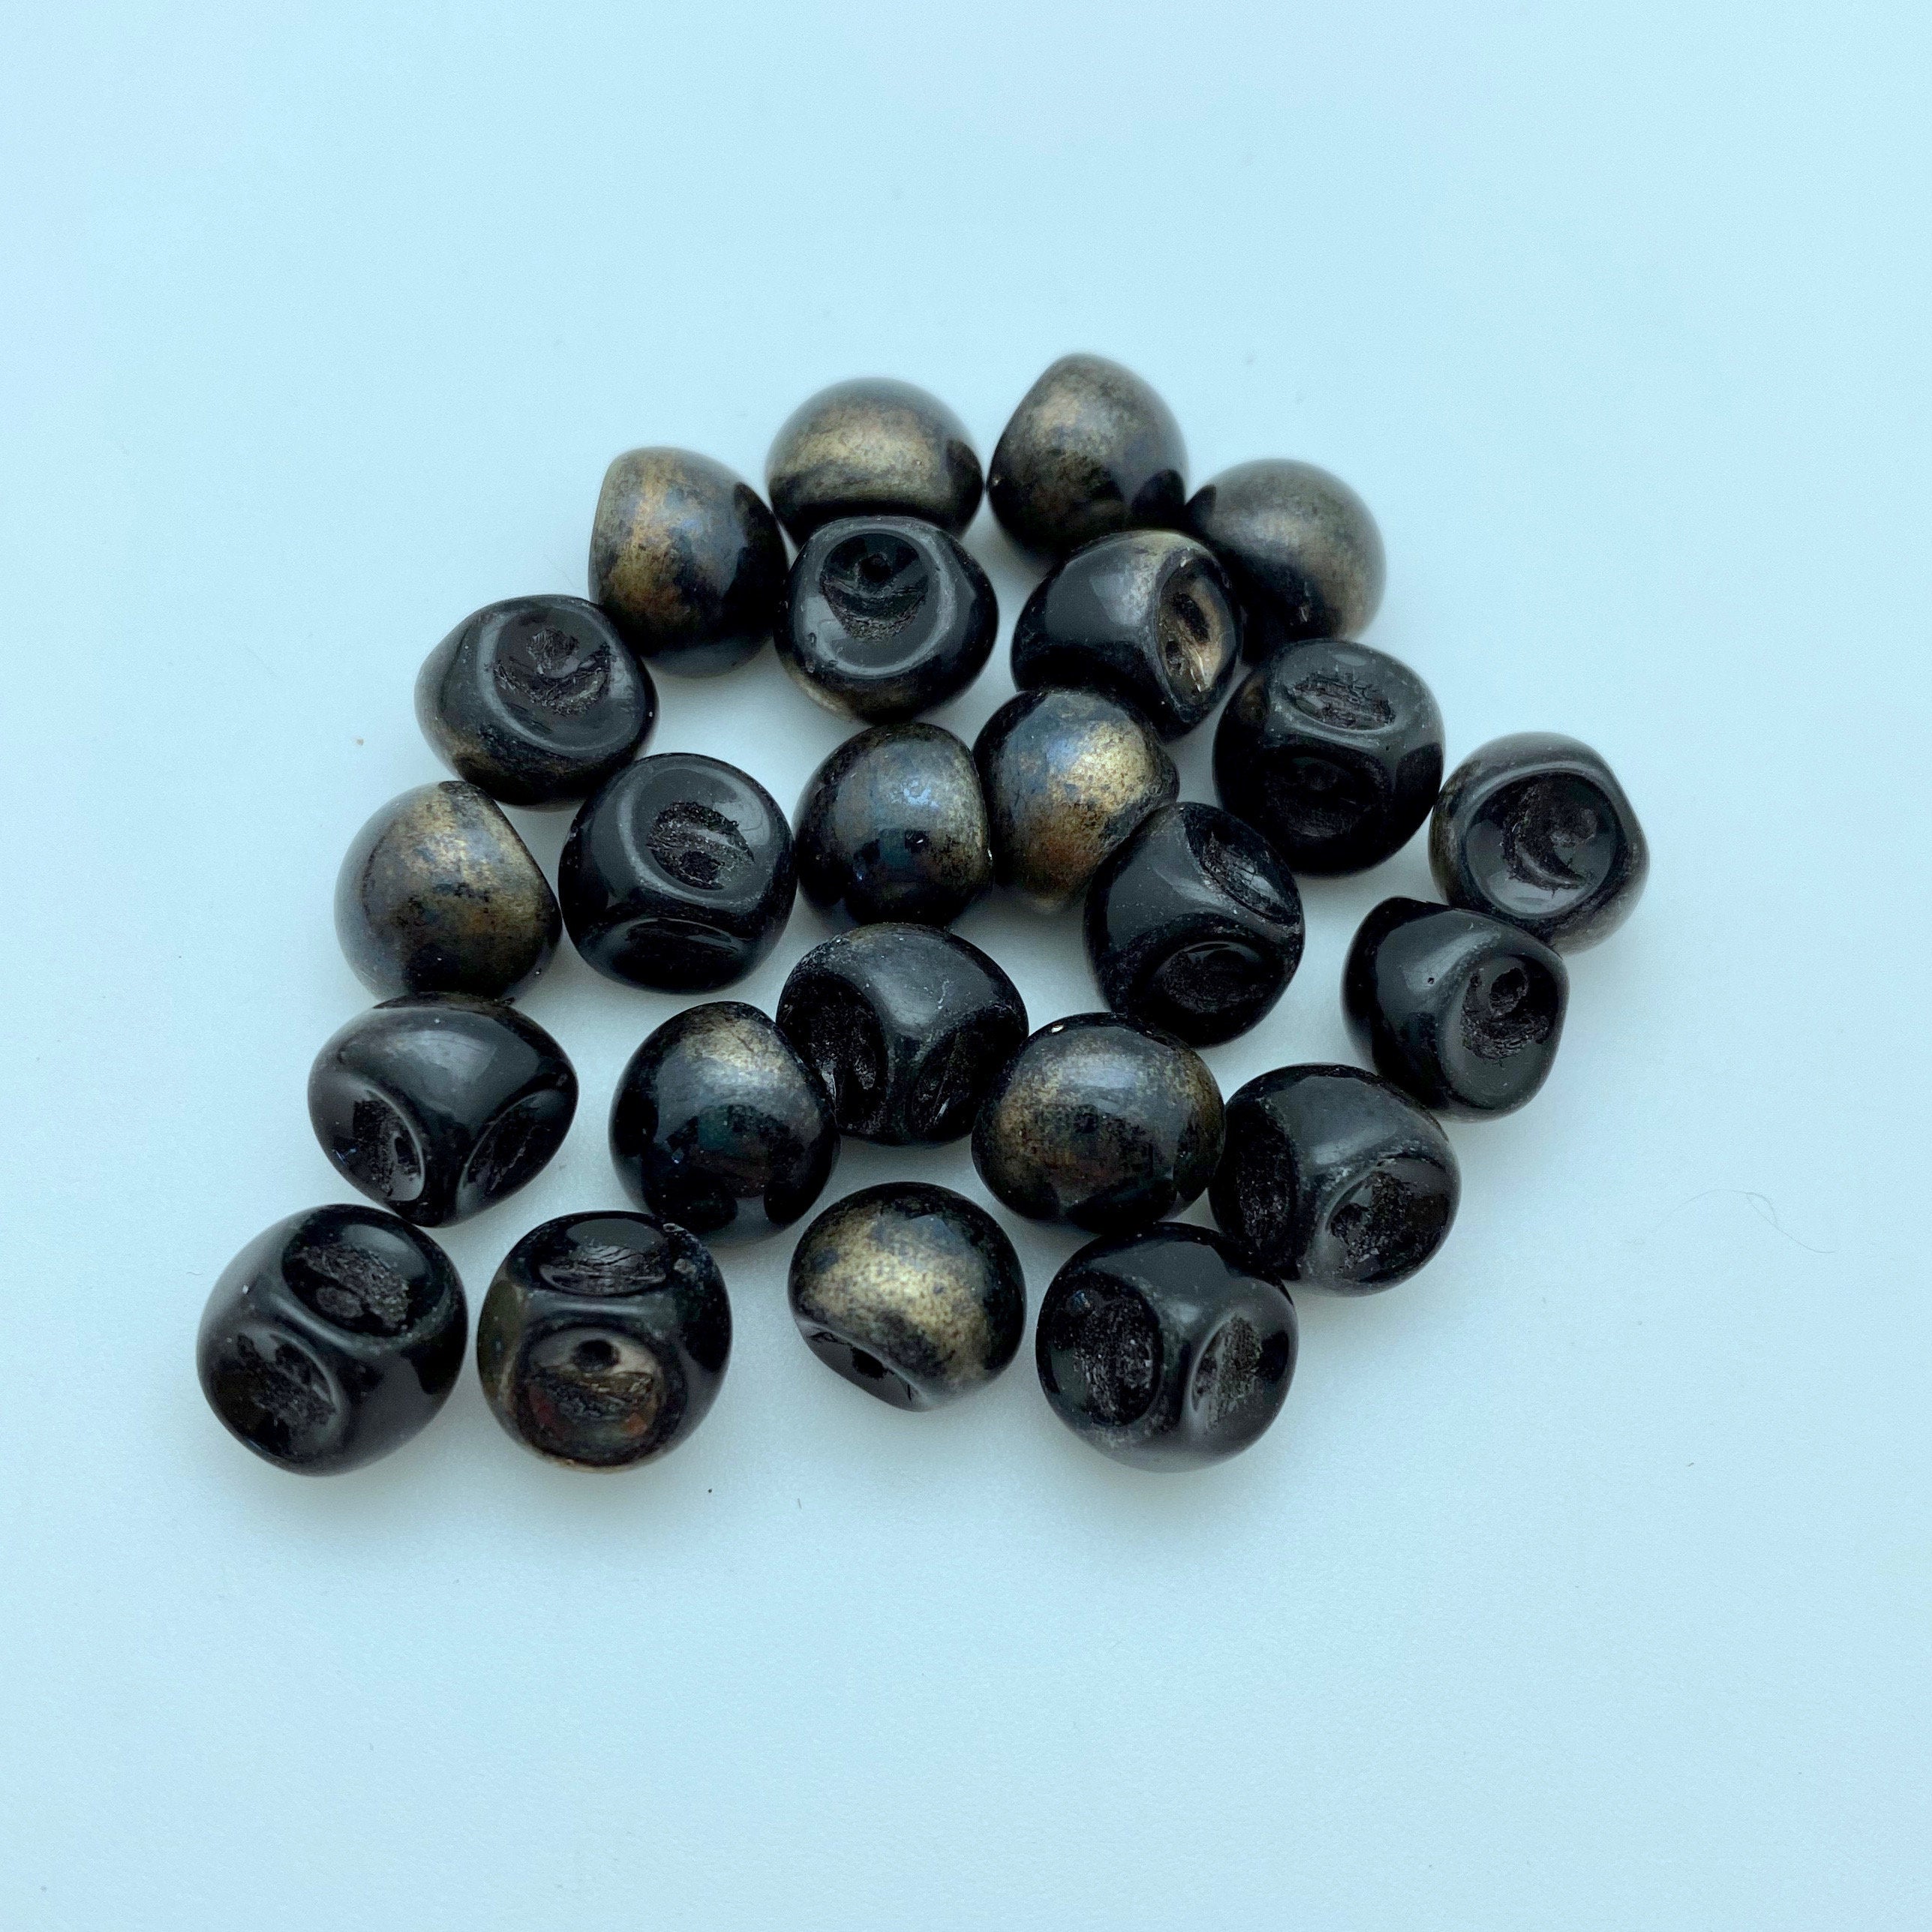 Shiny Black With Hints Of Gold Czech Glass Mushroom Beads (8mm) (SCG94 –  The Mod Ant